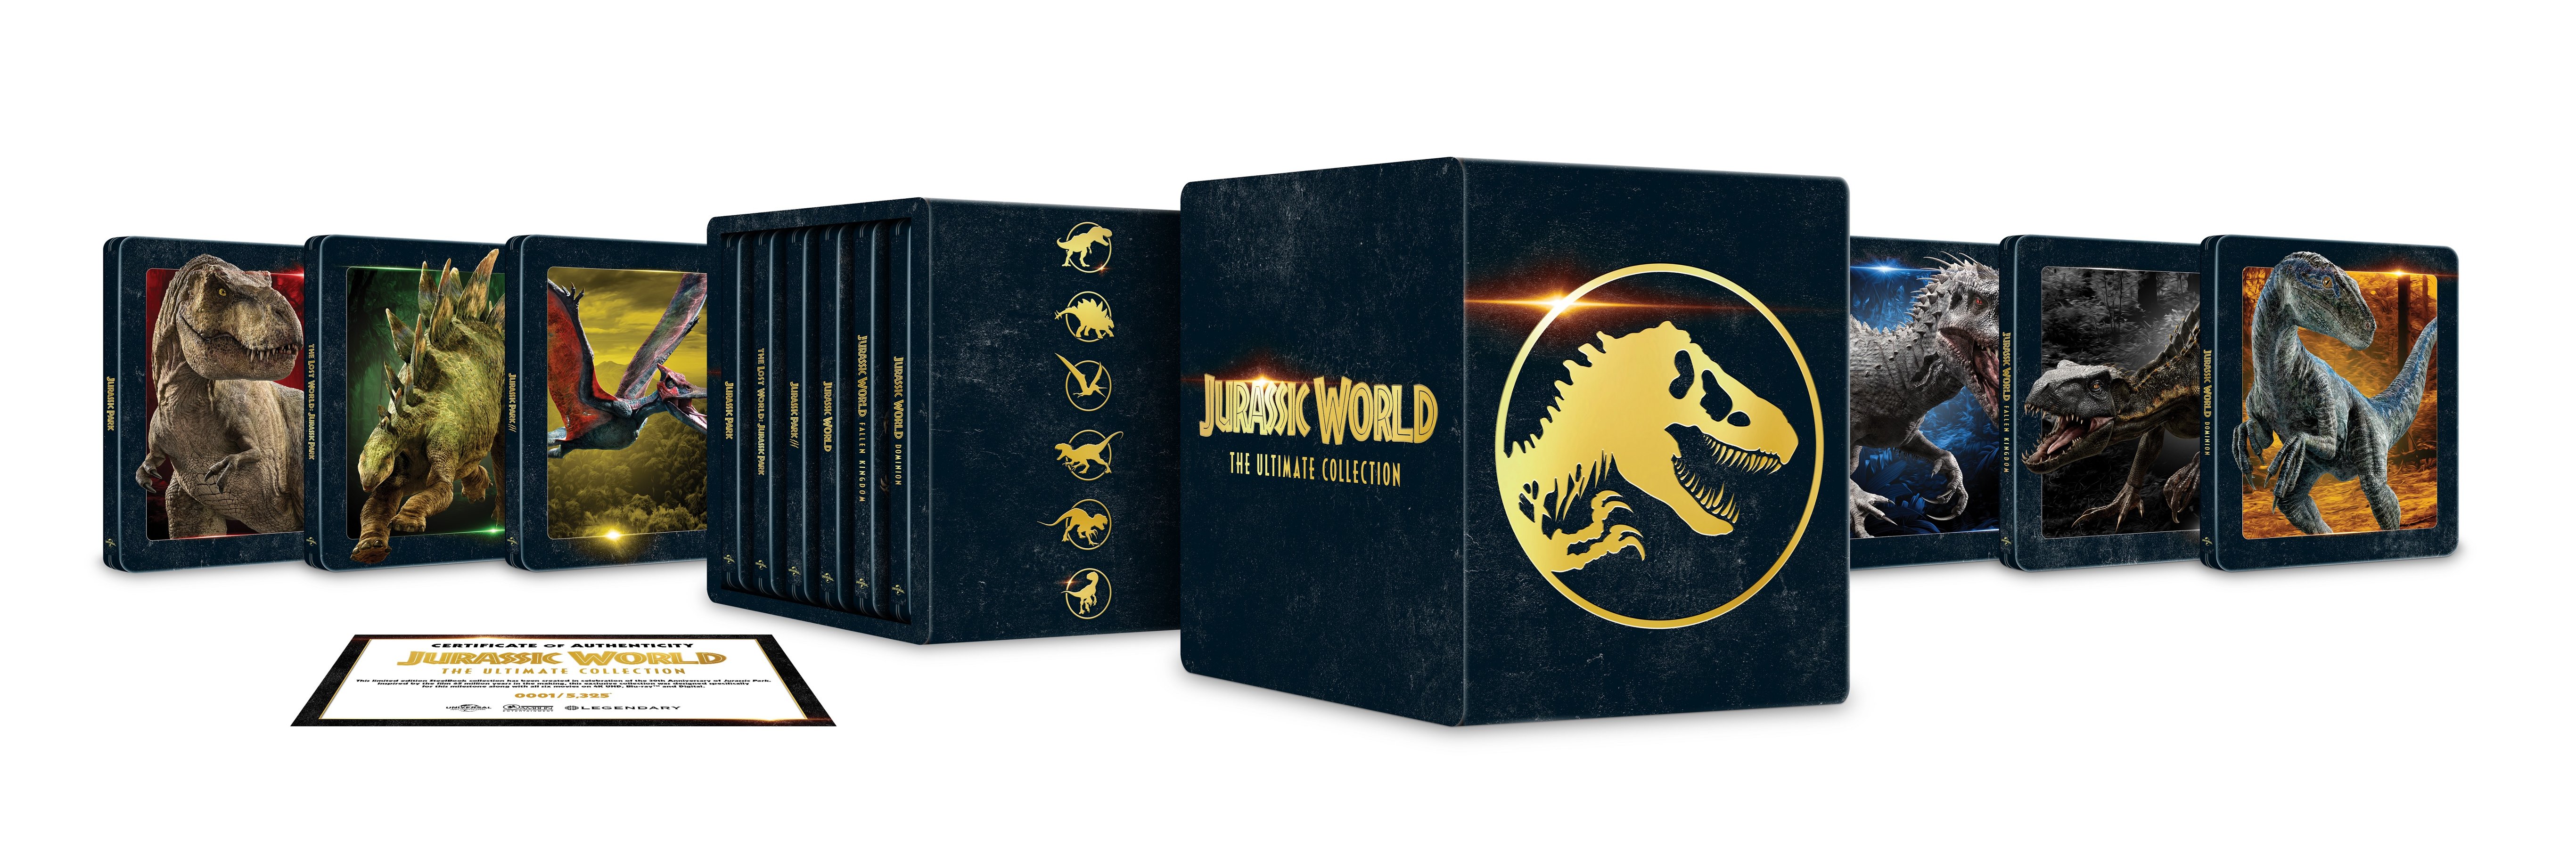 Jurassic World: The Ultimate Collection [SteelBook] [4K Ultra HD Blu-ray/Blu-ray] [Only at Best Buy]